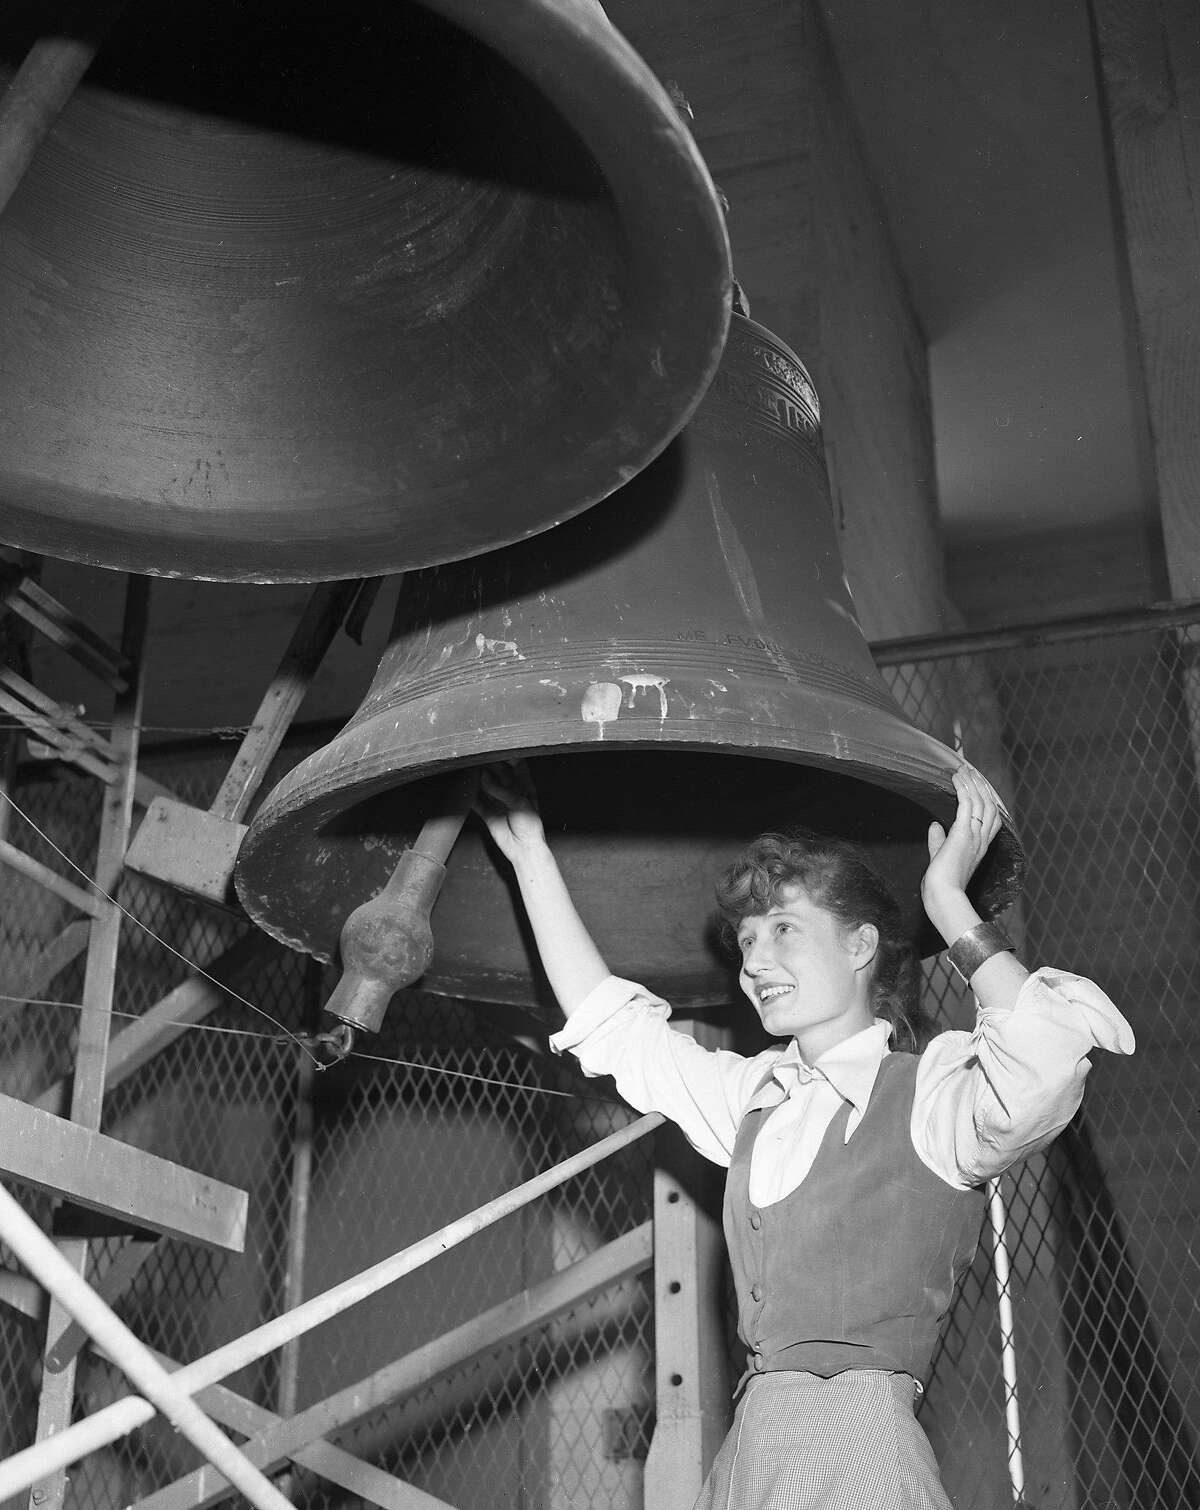 Bells of the Hoover Institution Tower on the Stanford University Carillon player Olwen Wymark looks at bells Photos shot November 3, 1953